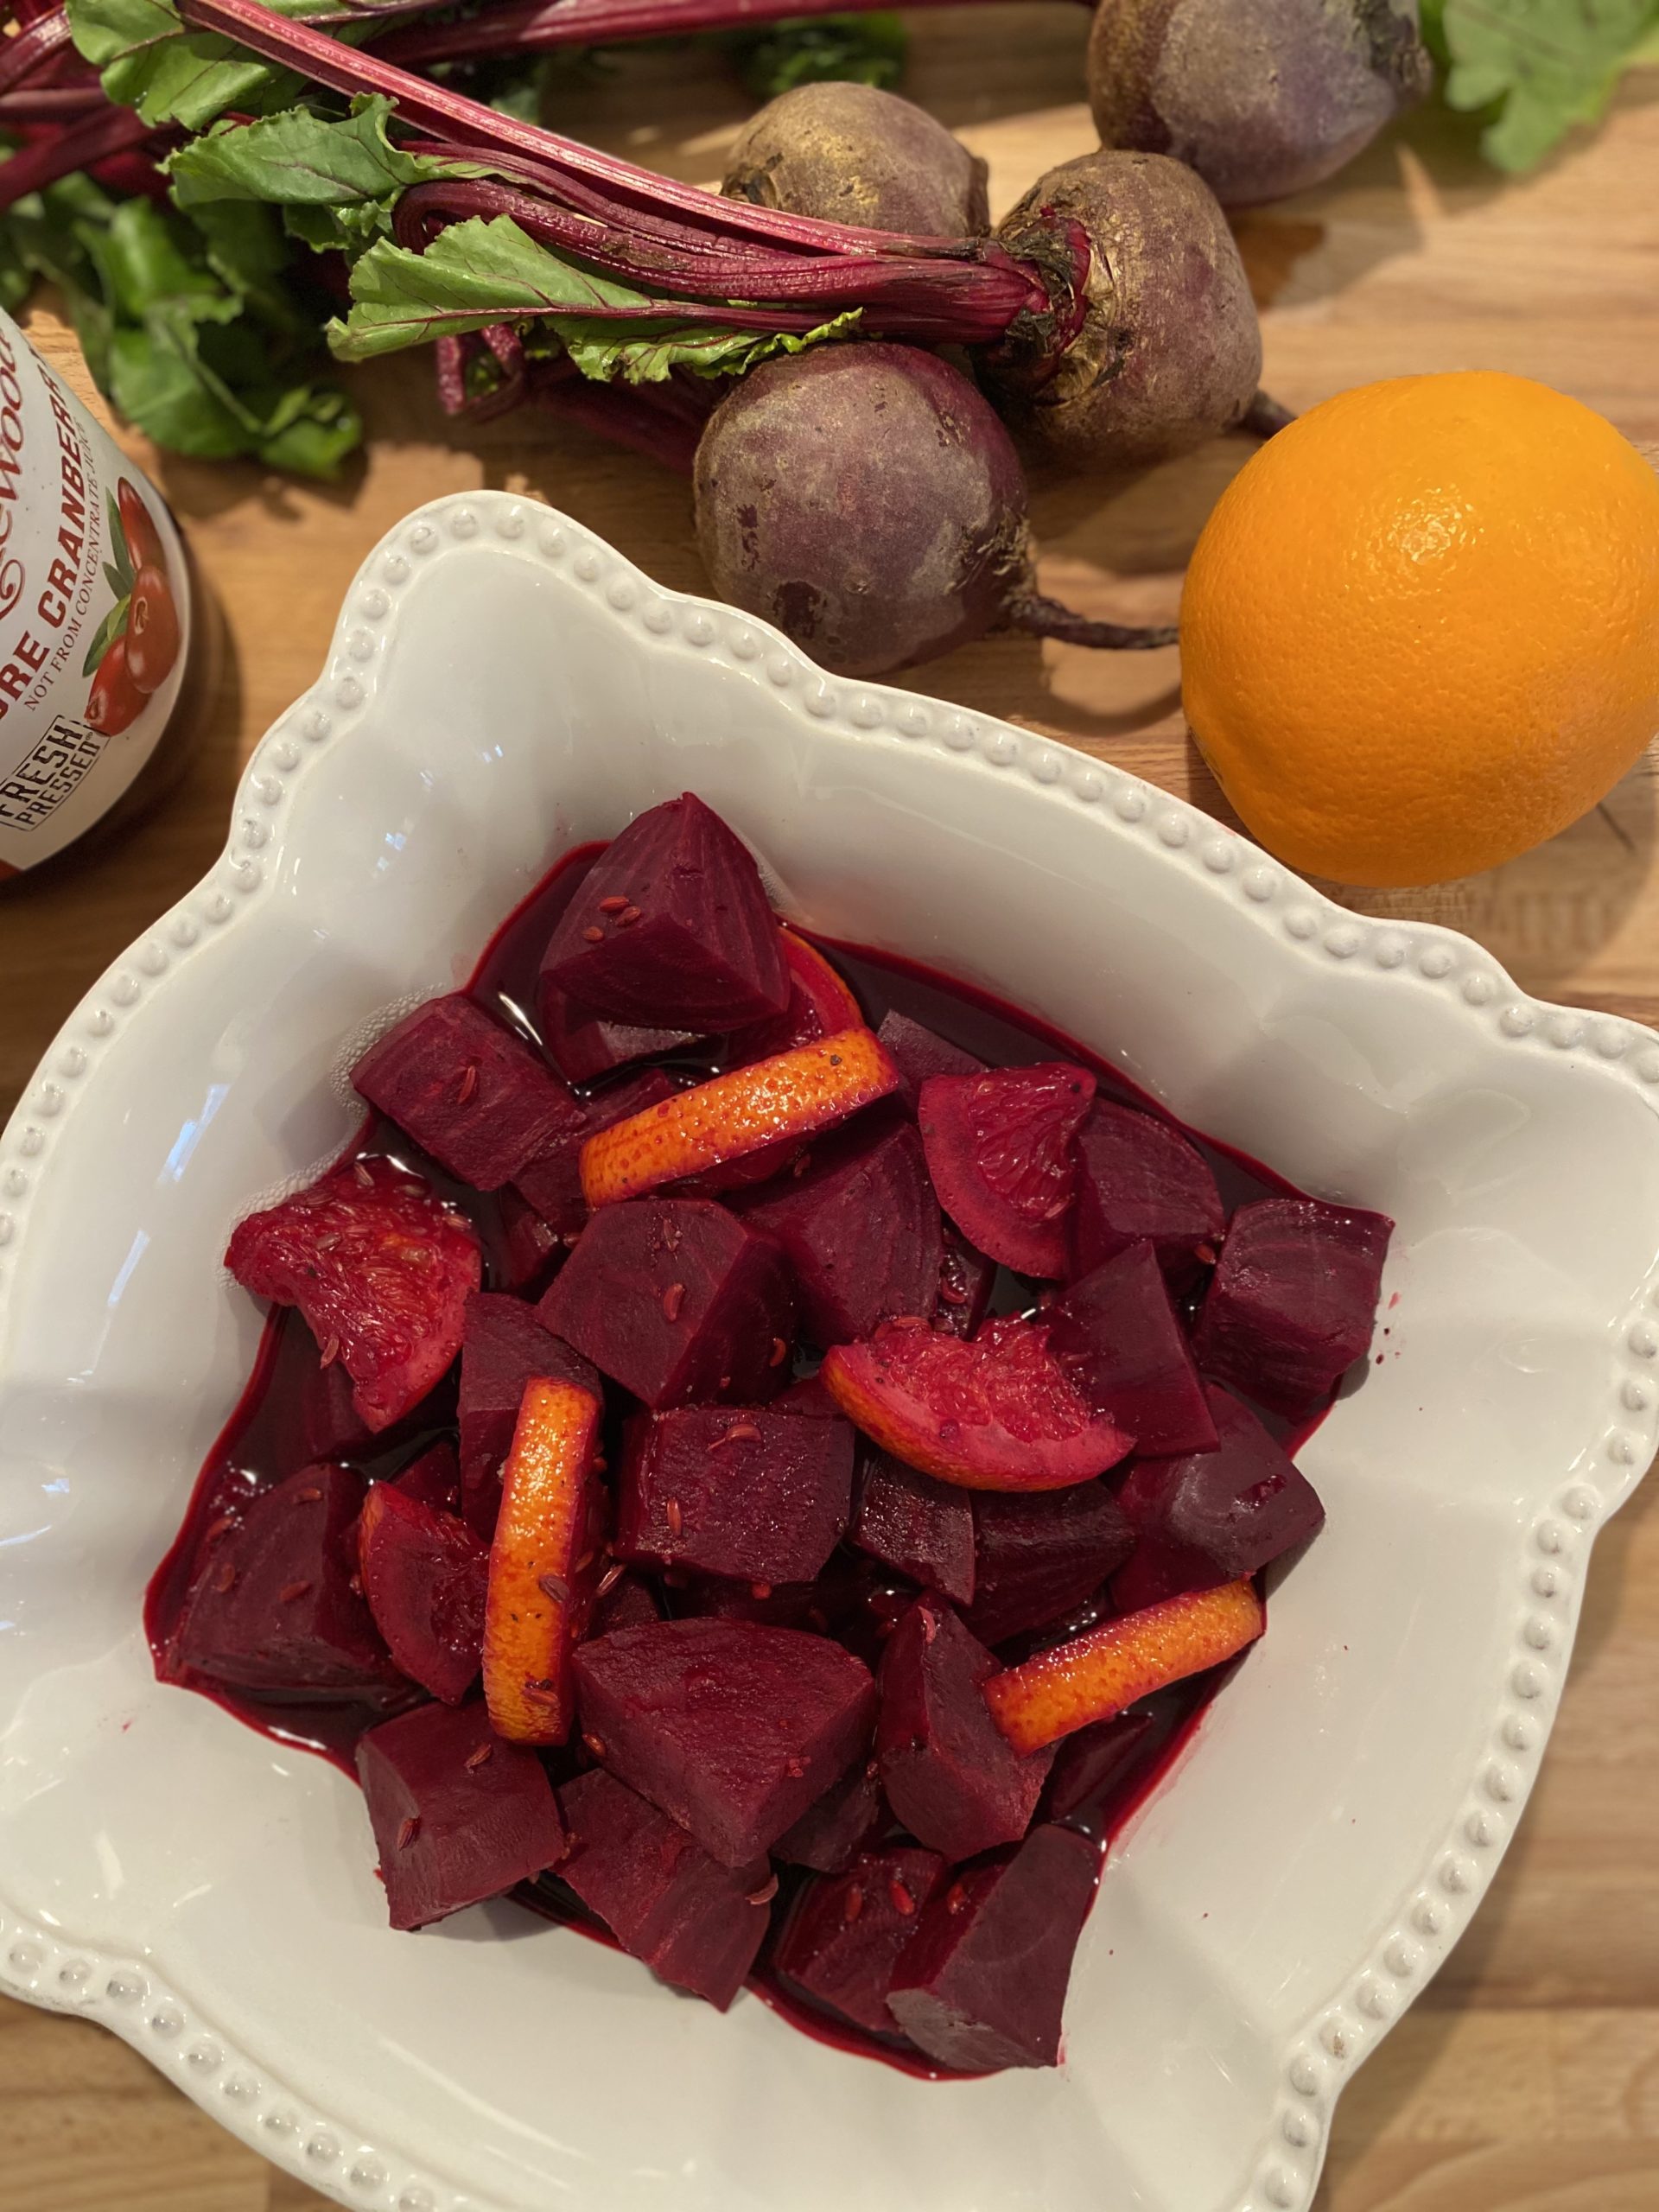 Roasted Beets in 100% Cranberry Juice